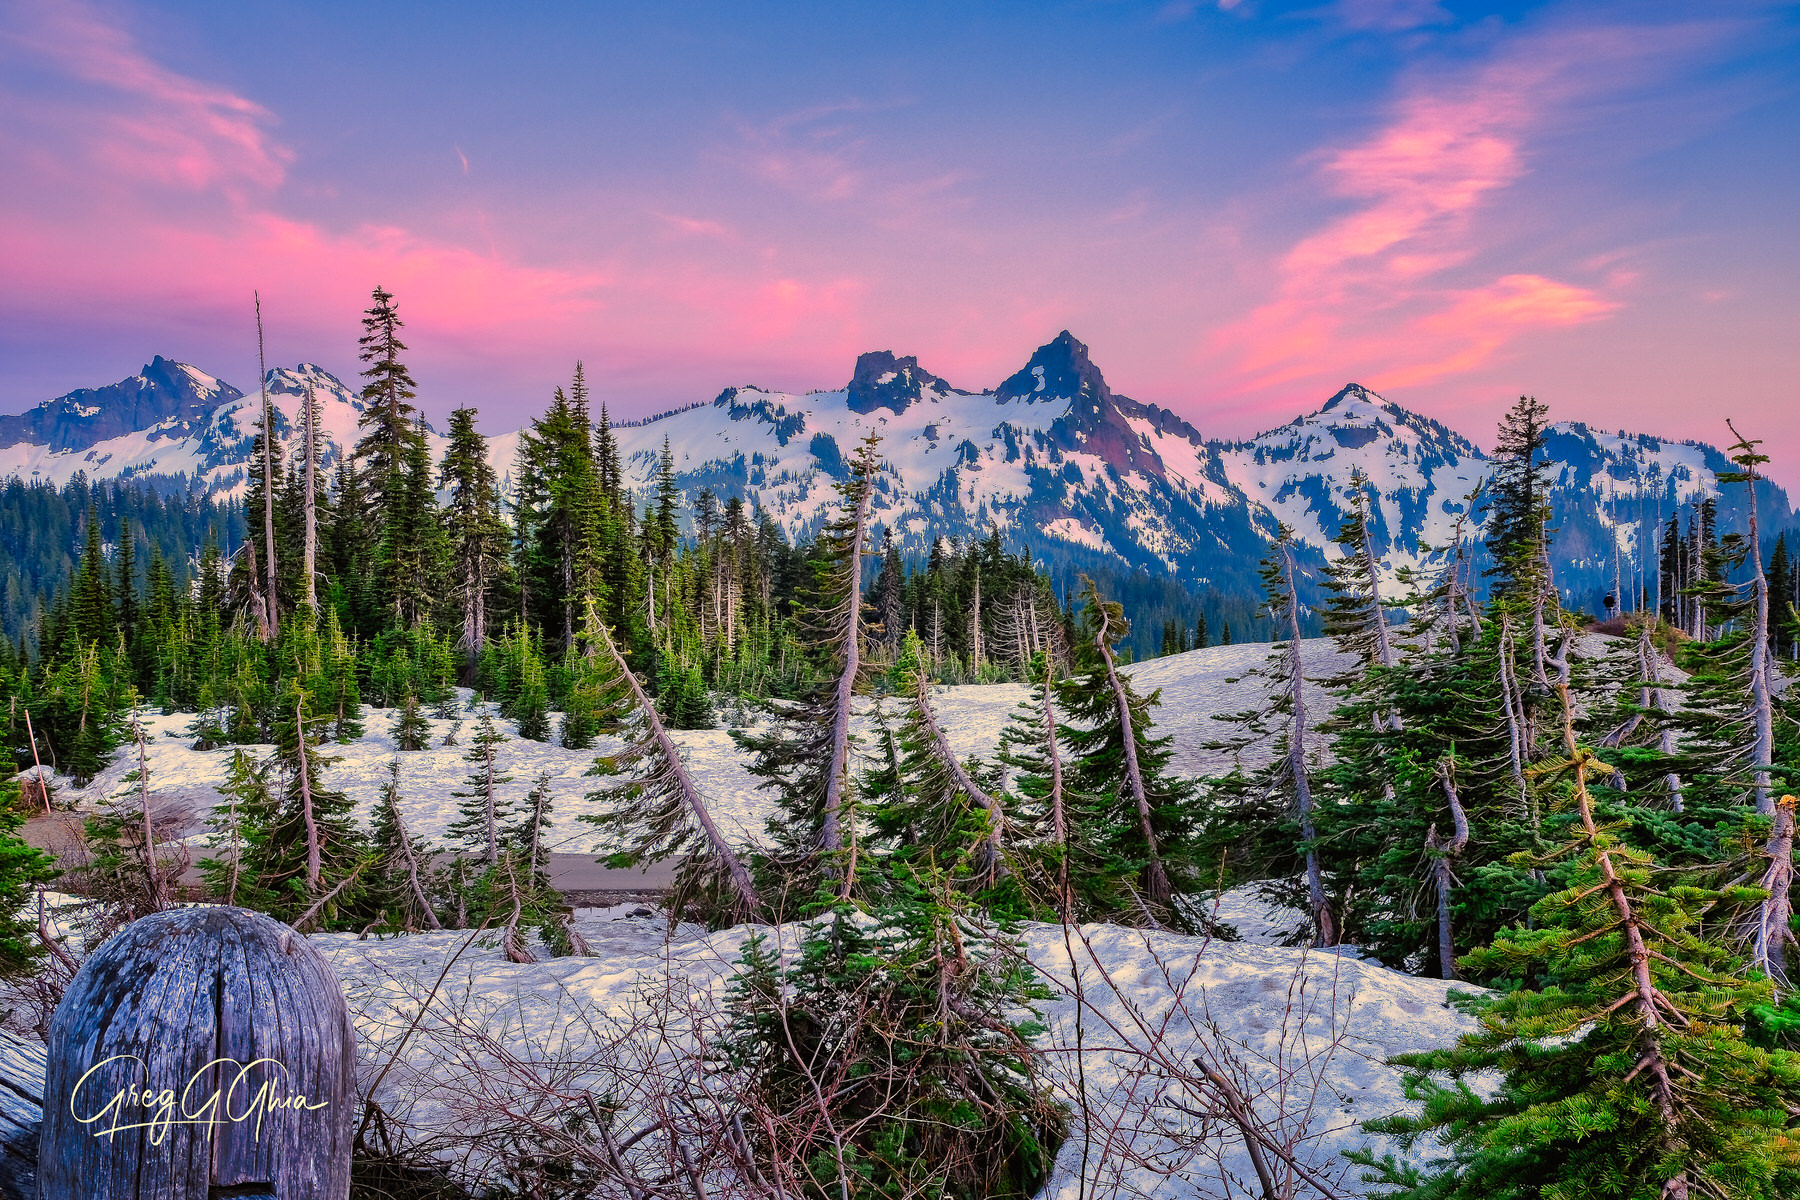 Mountains are seen against a pink sky with pine trees and snow on the ground in front of the mountains. 